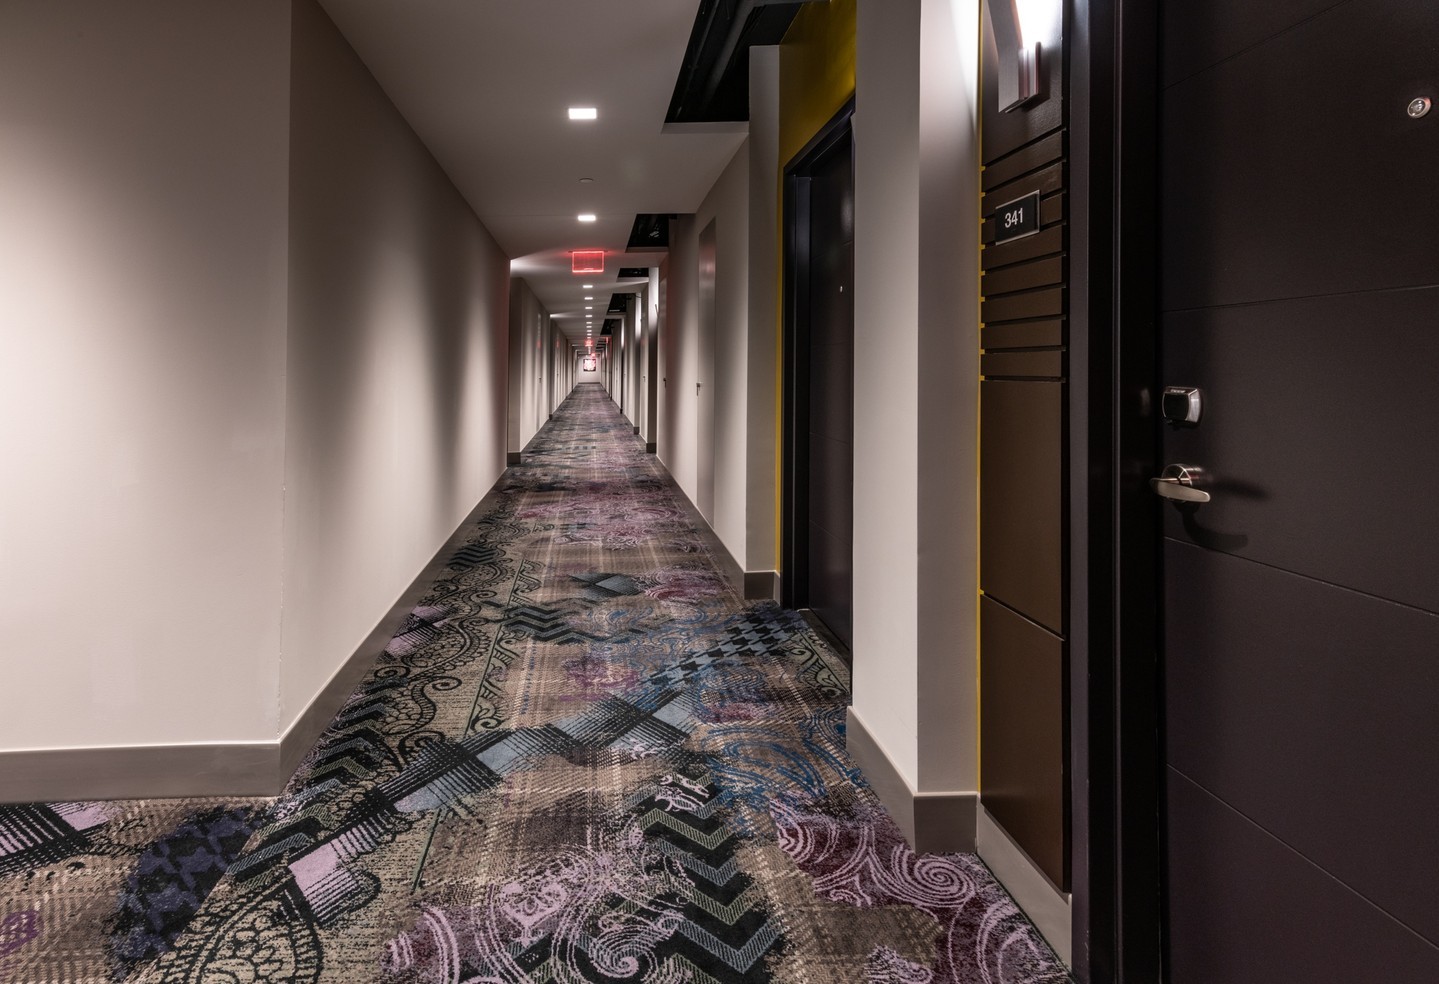 Corridors with personality. @aveconhapts